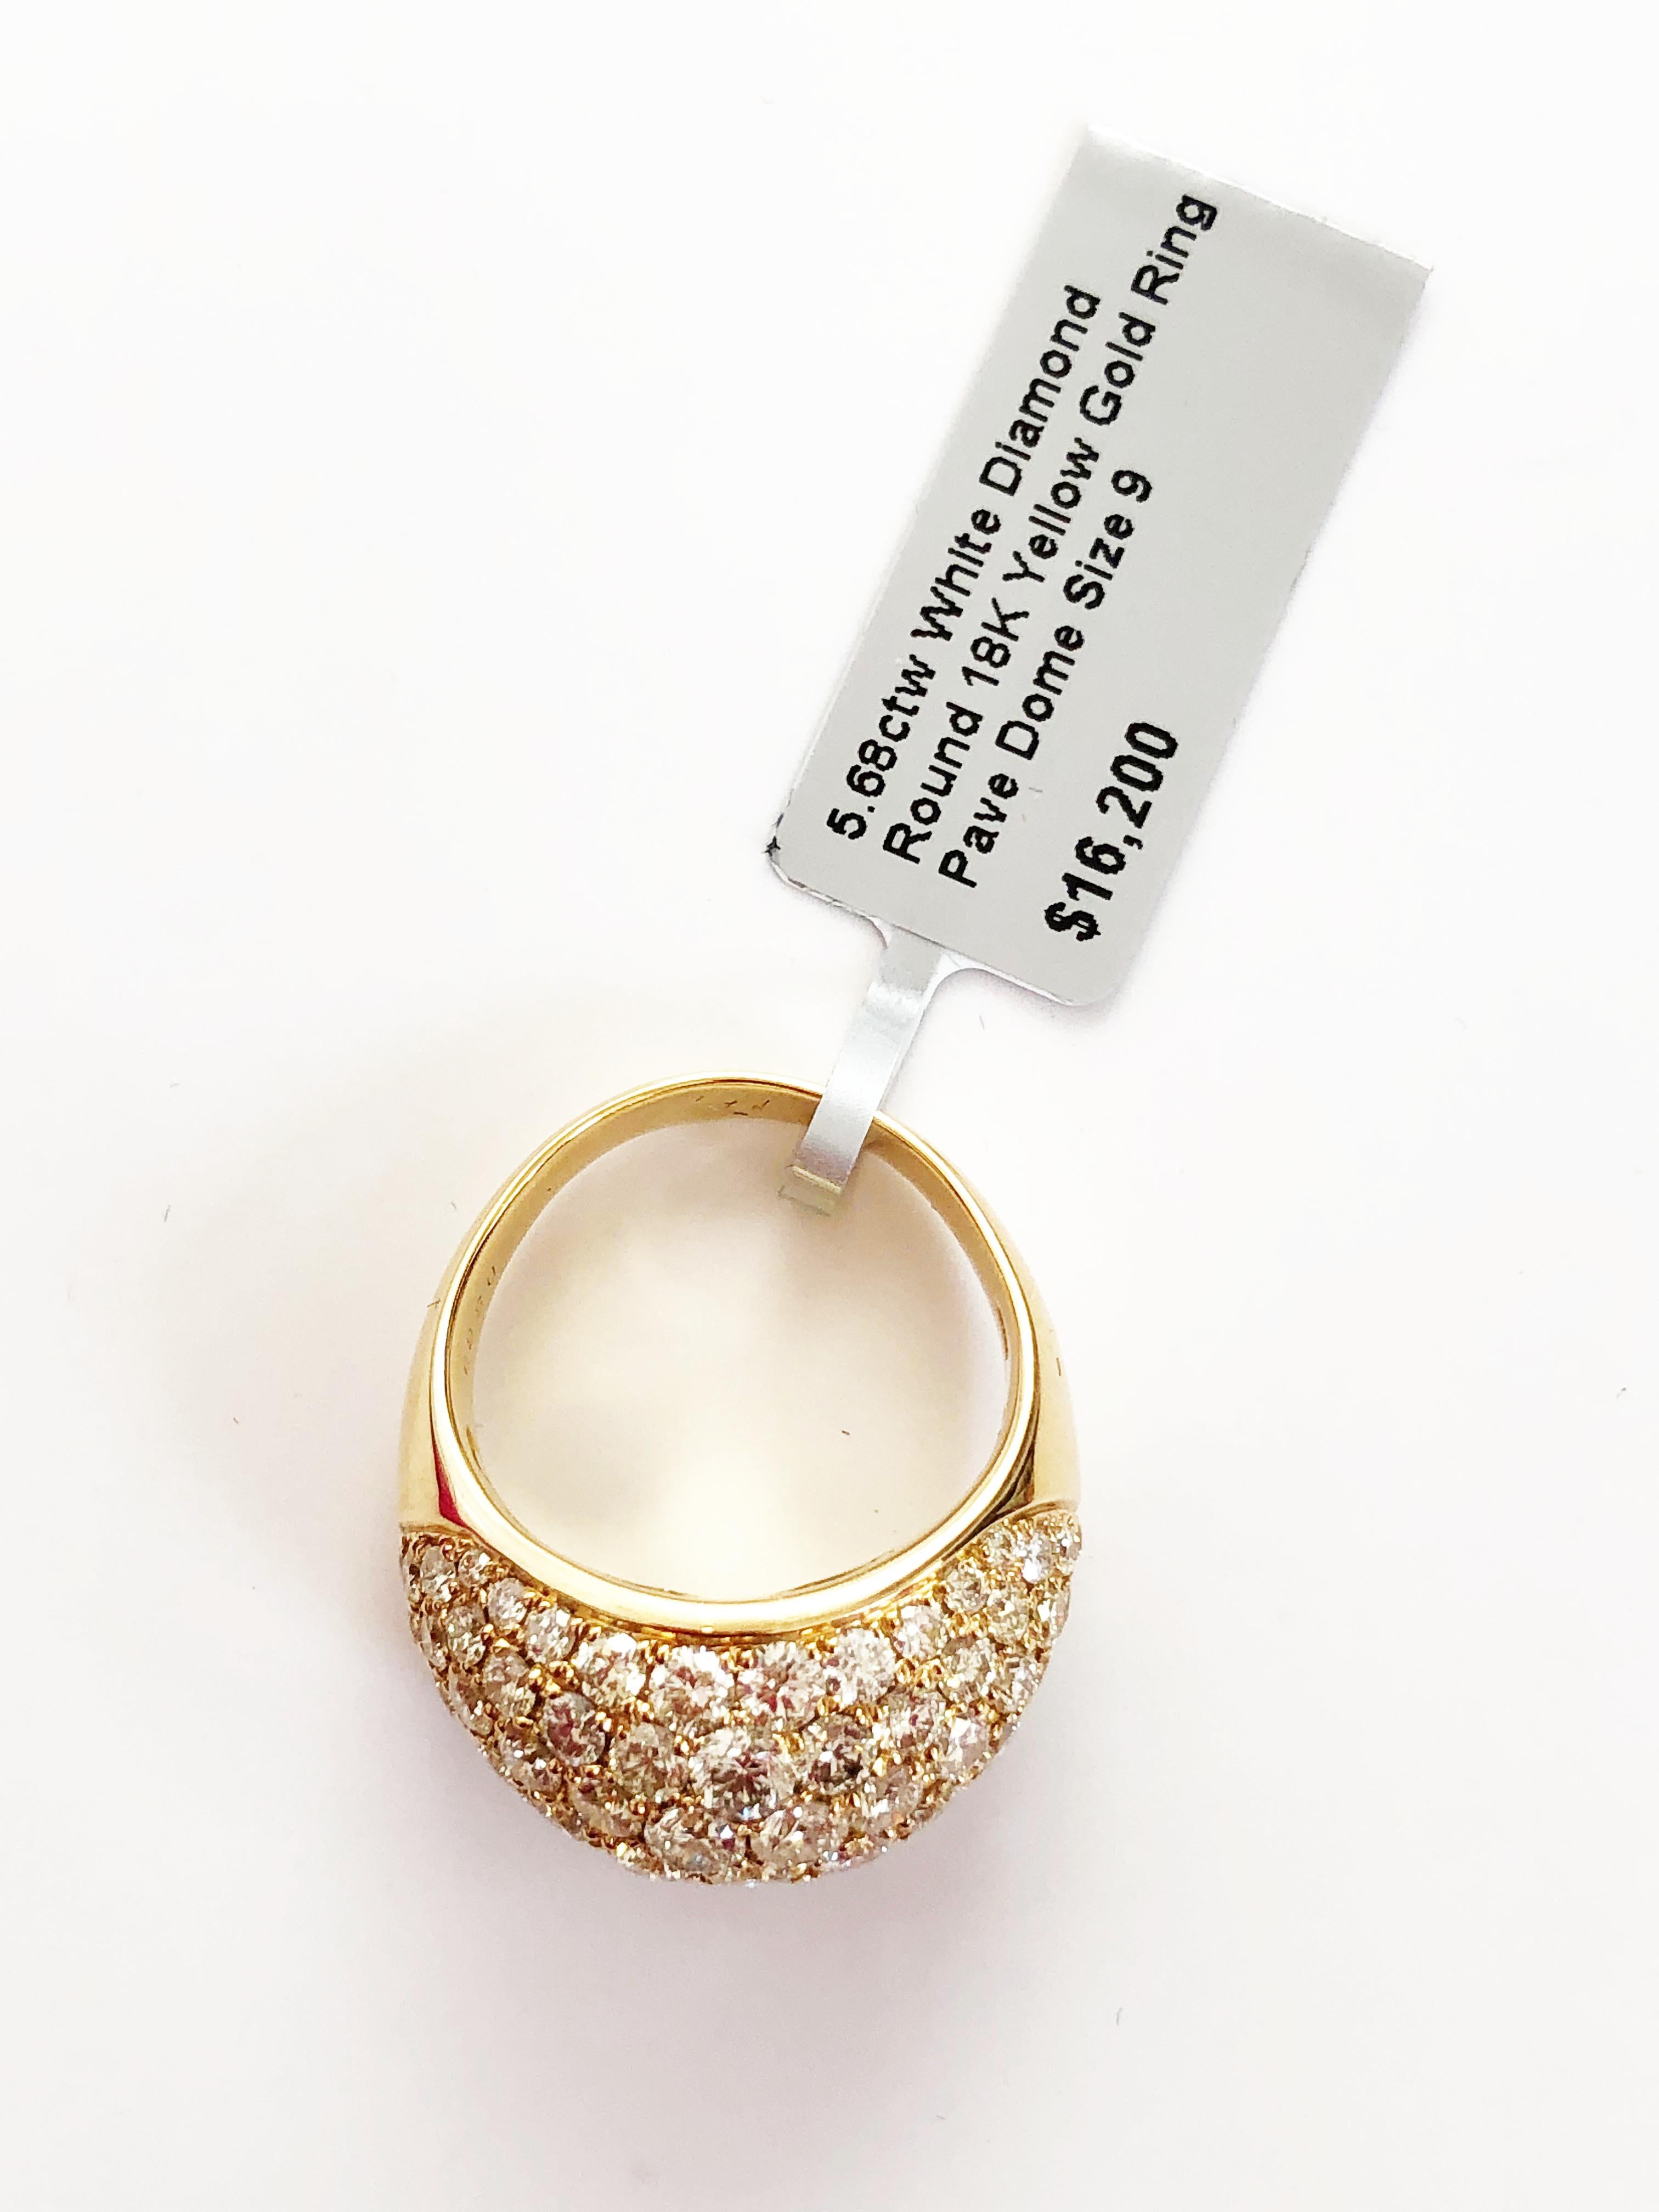 Beautiful pave white diamond rounds weighing 5.68 carats in 18k yellow gold.  Handmade in size 9.  This cocktail ring is always going to be in fashion with it's evergreen design.  Perfect to add a little spunk to any outfit.